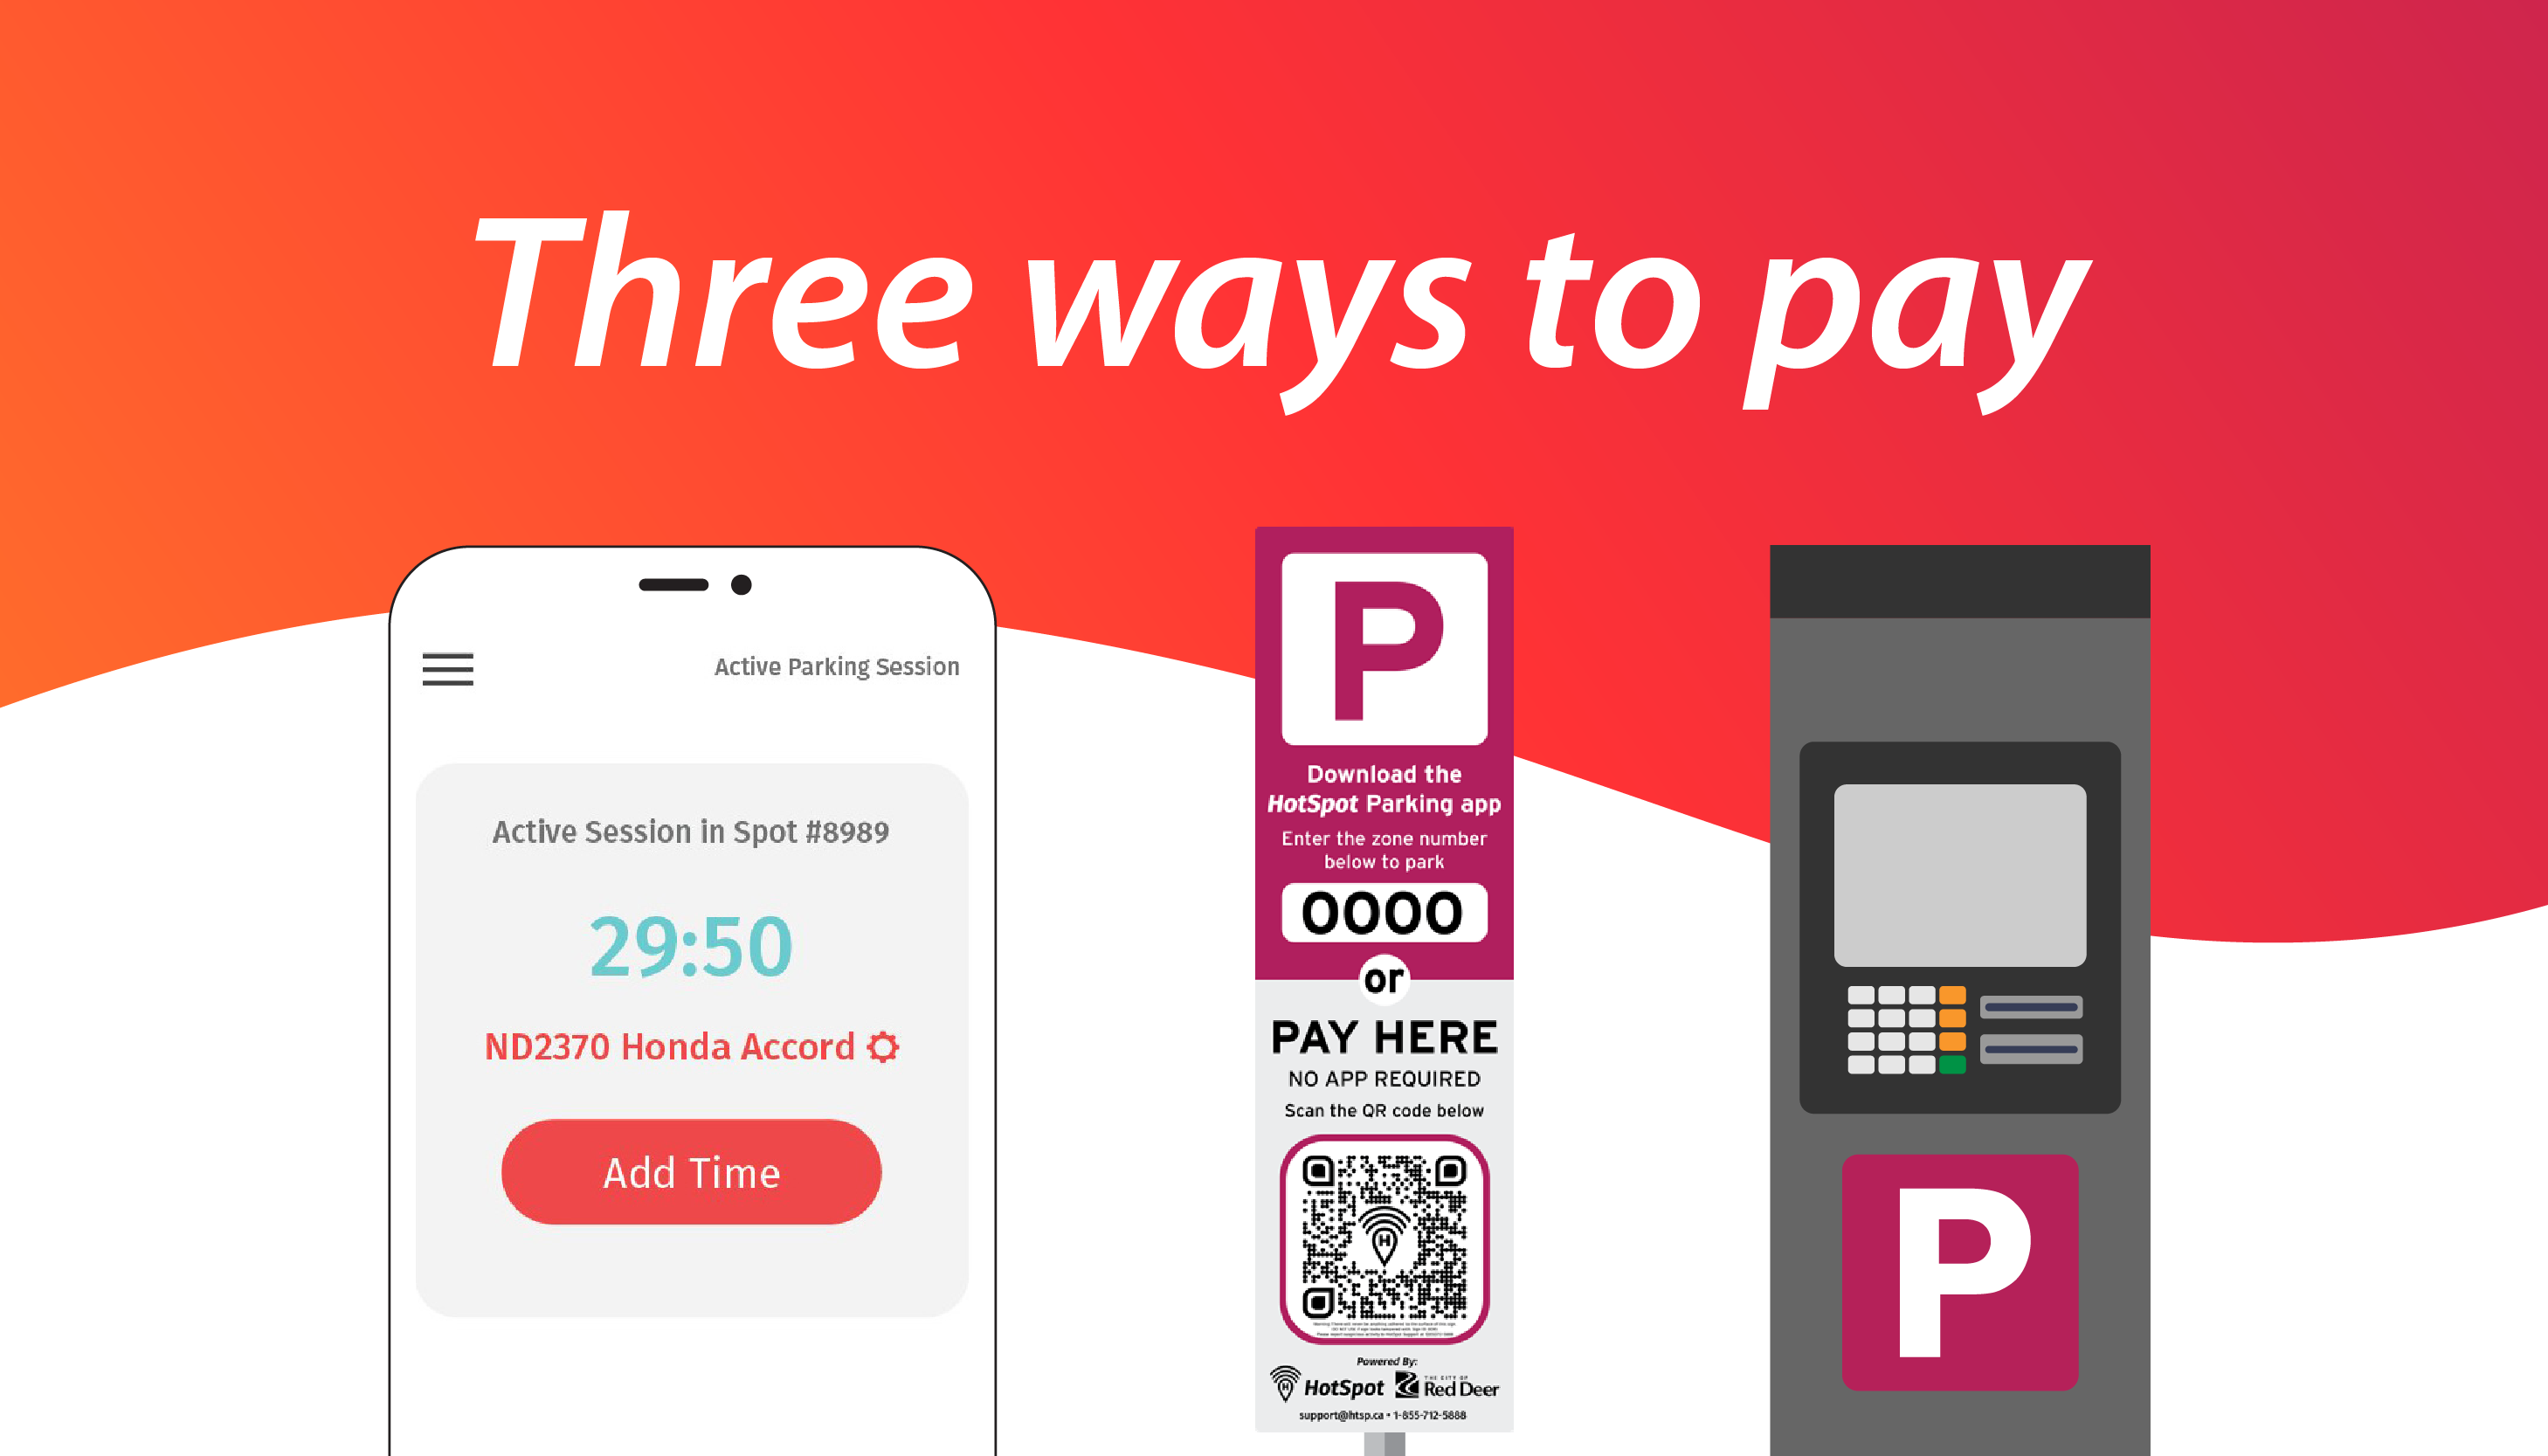 There are three ways to pay for parking with hotspot - an app, fast tap sign or pay station